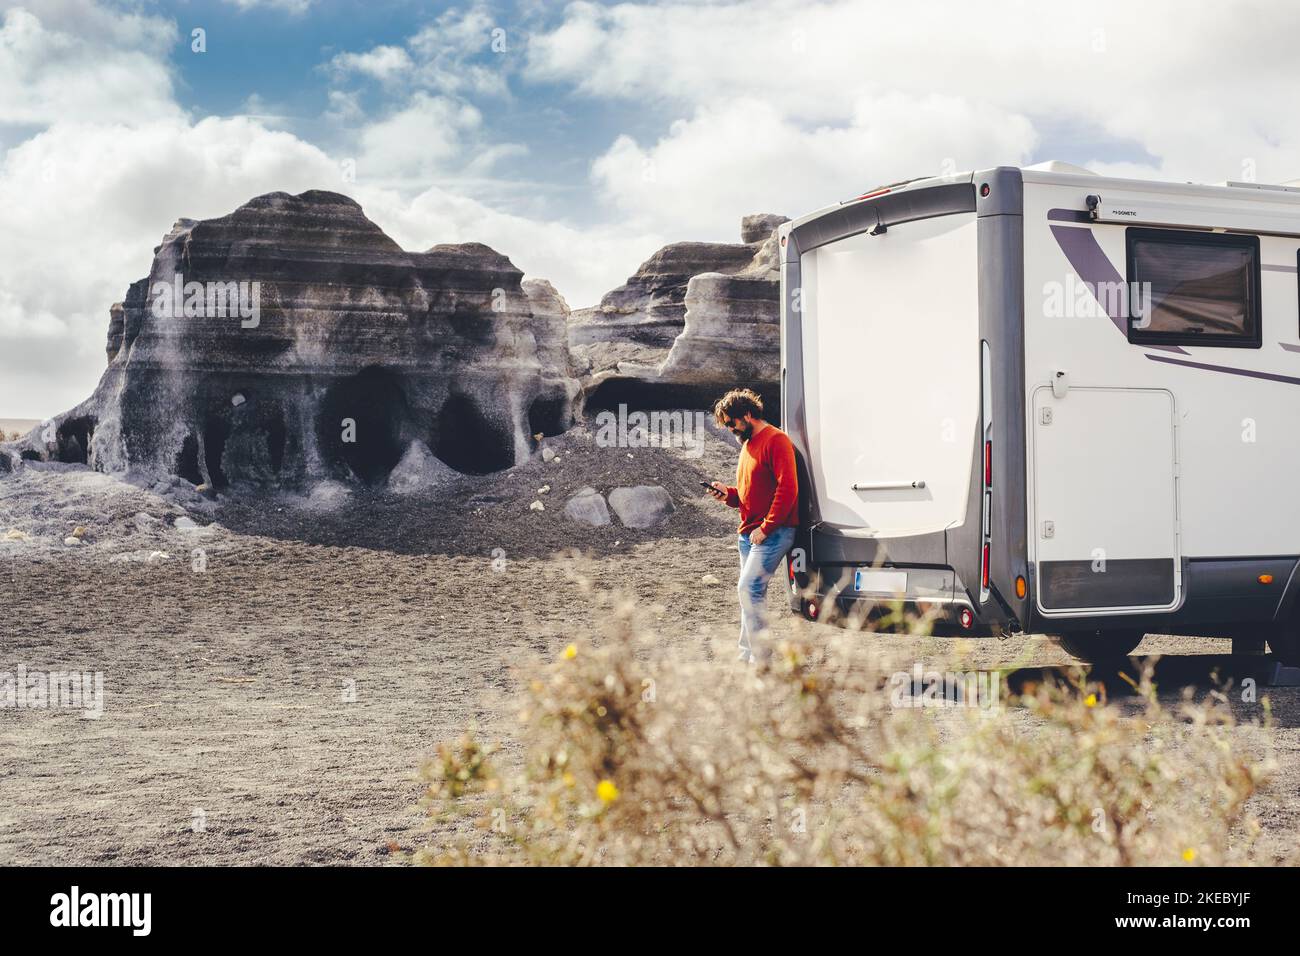 Standing man using mobile phone against a modern camper van and country side rural landscape in background. Concept of travel and connection technlogy to plan road trip and holiday vacation Stock Photo